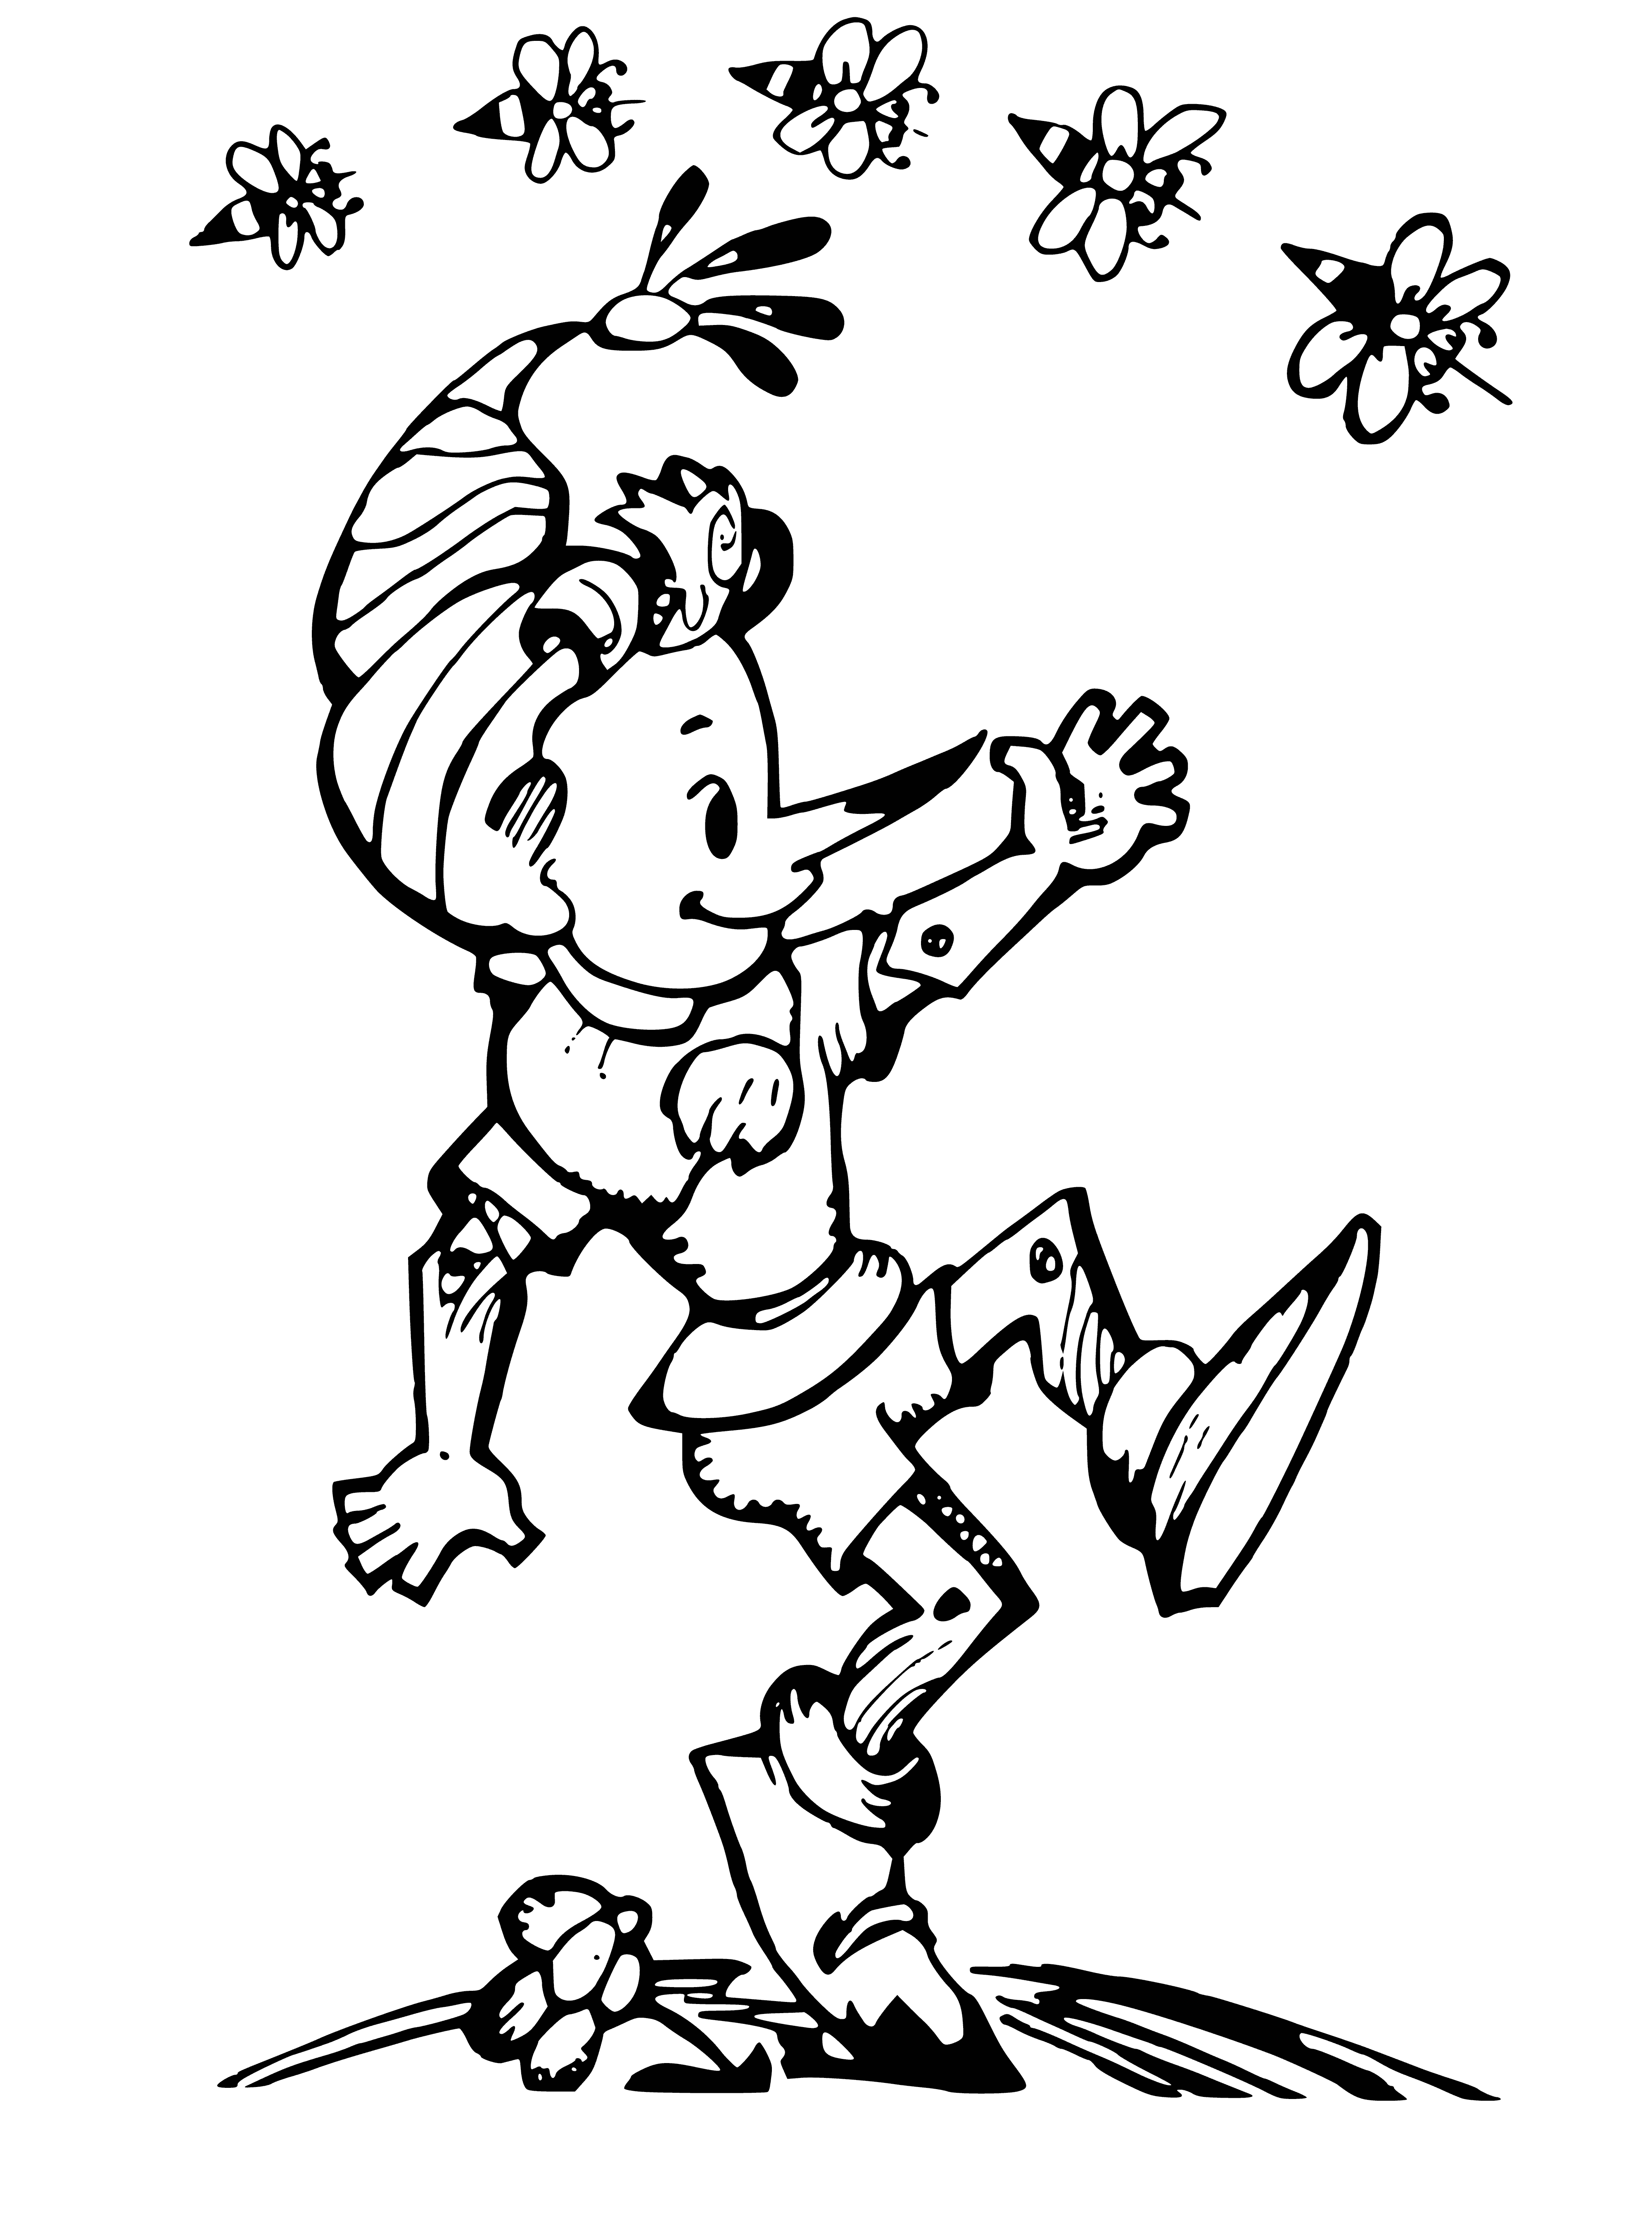 coloring page: A puppet lies on the ground, tattered clothing, gaunt face, with a small light in the distance amid a dark forest.